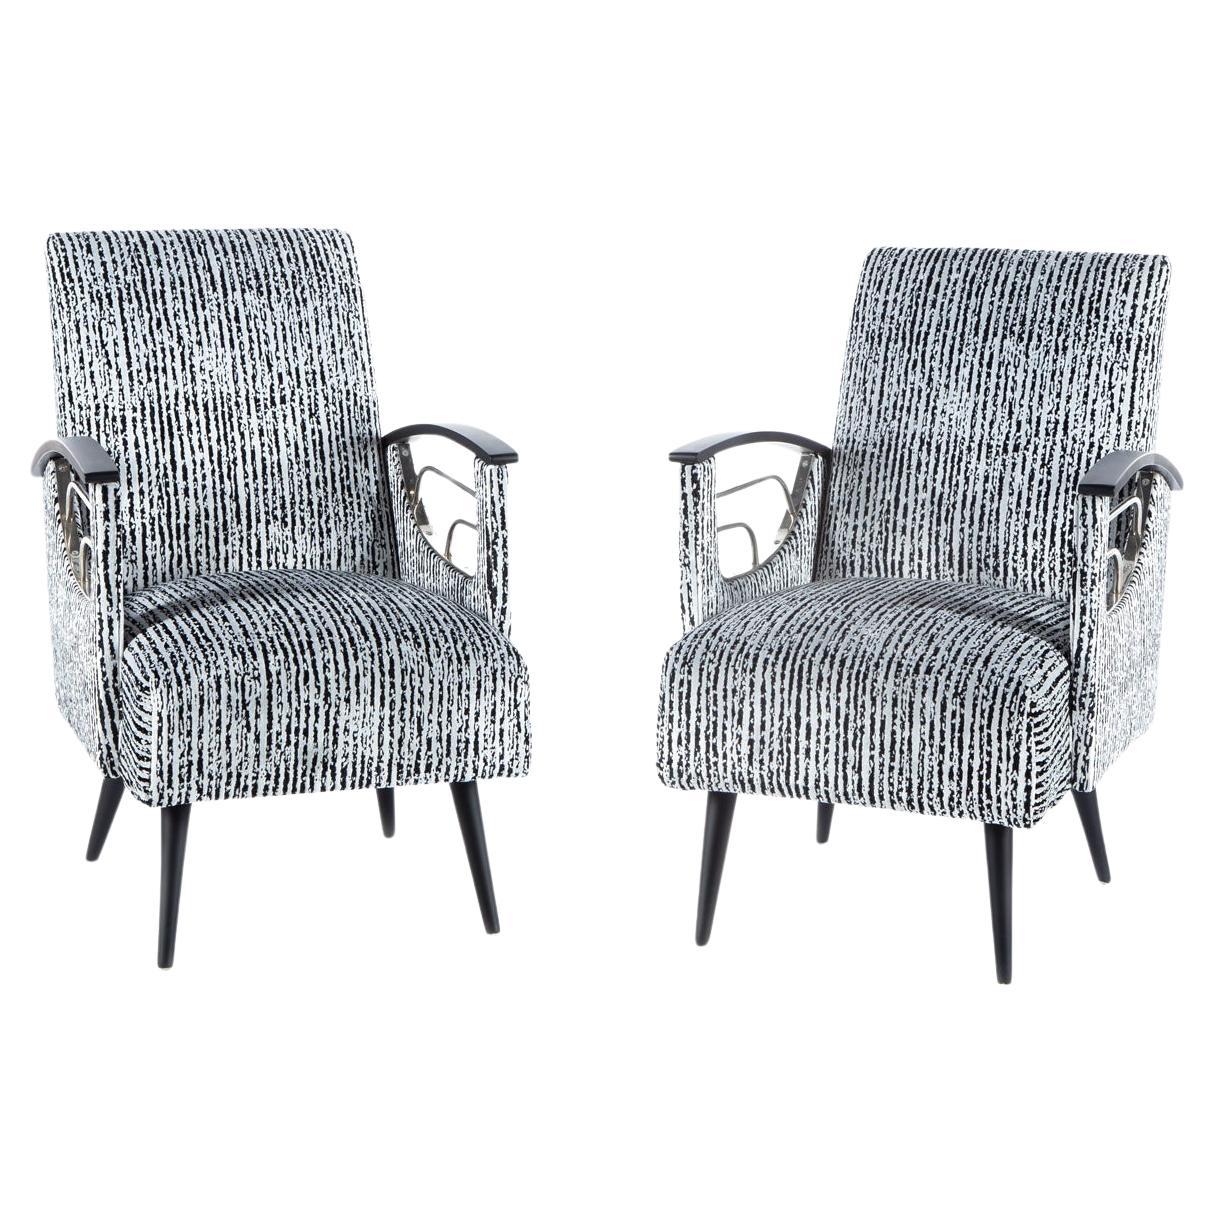 Armchairs, set of 2